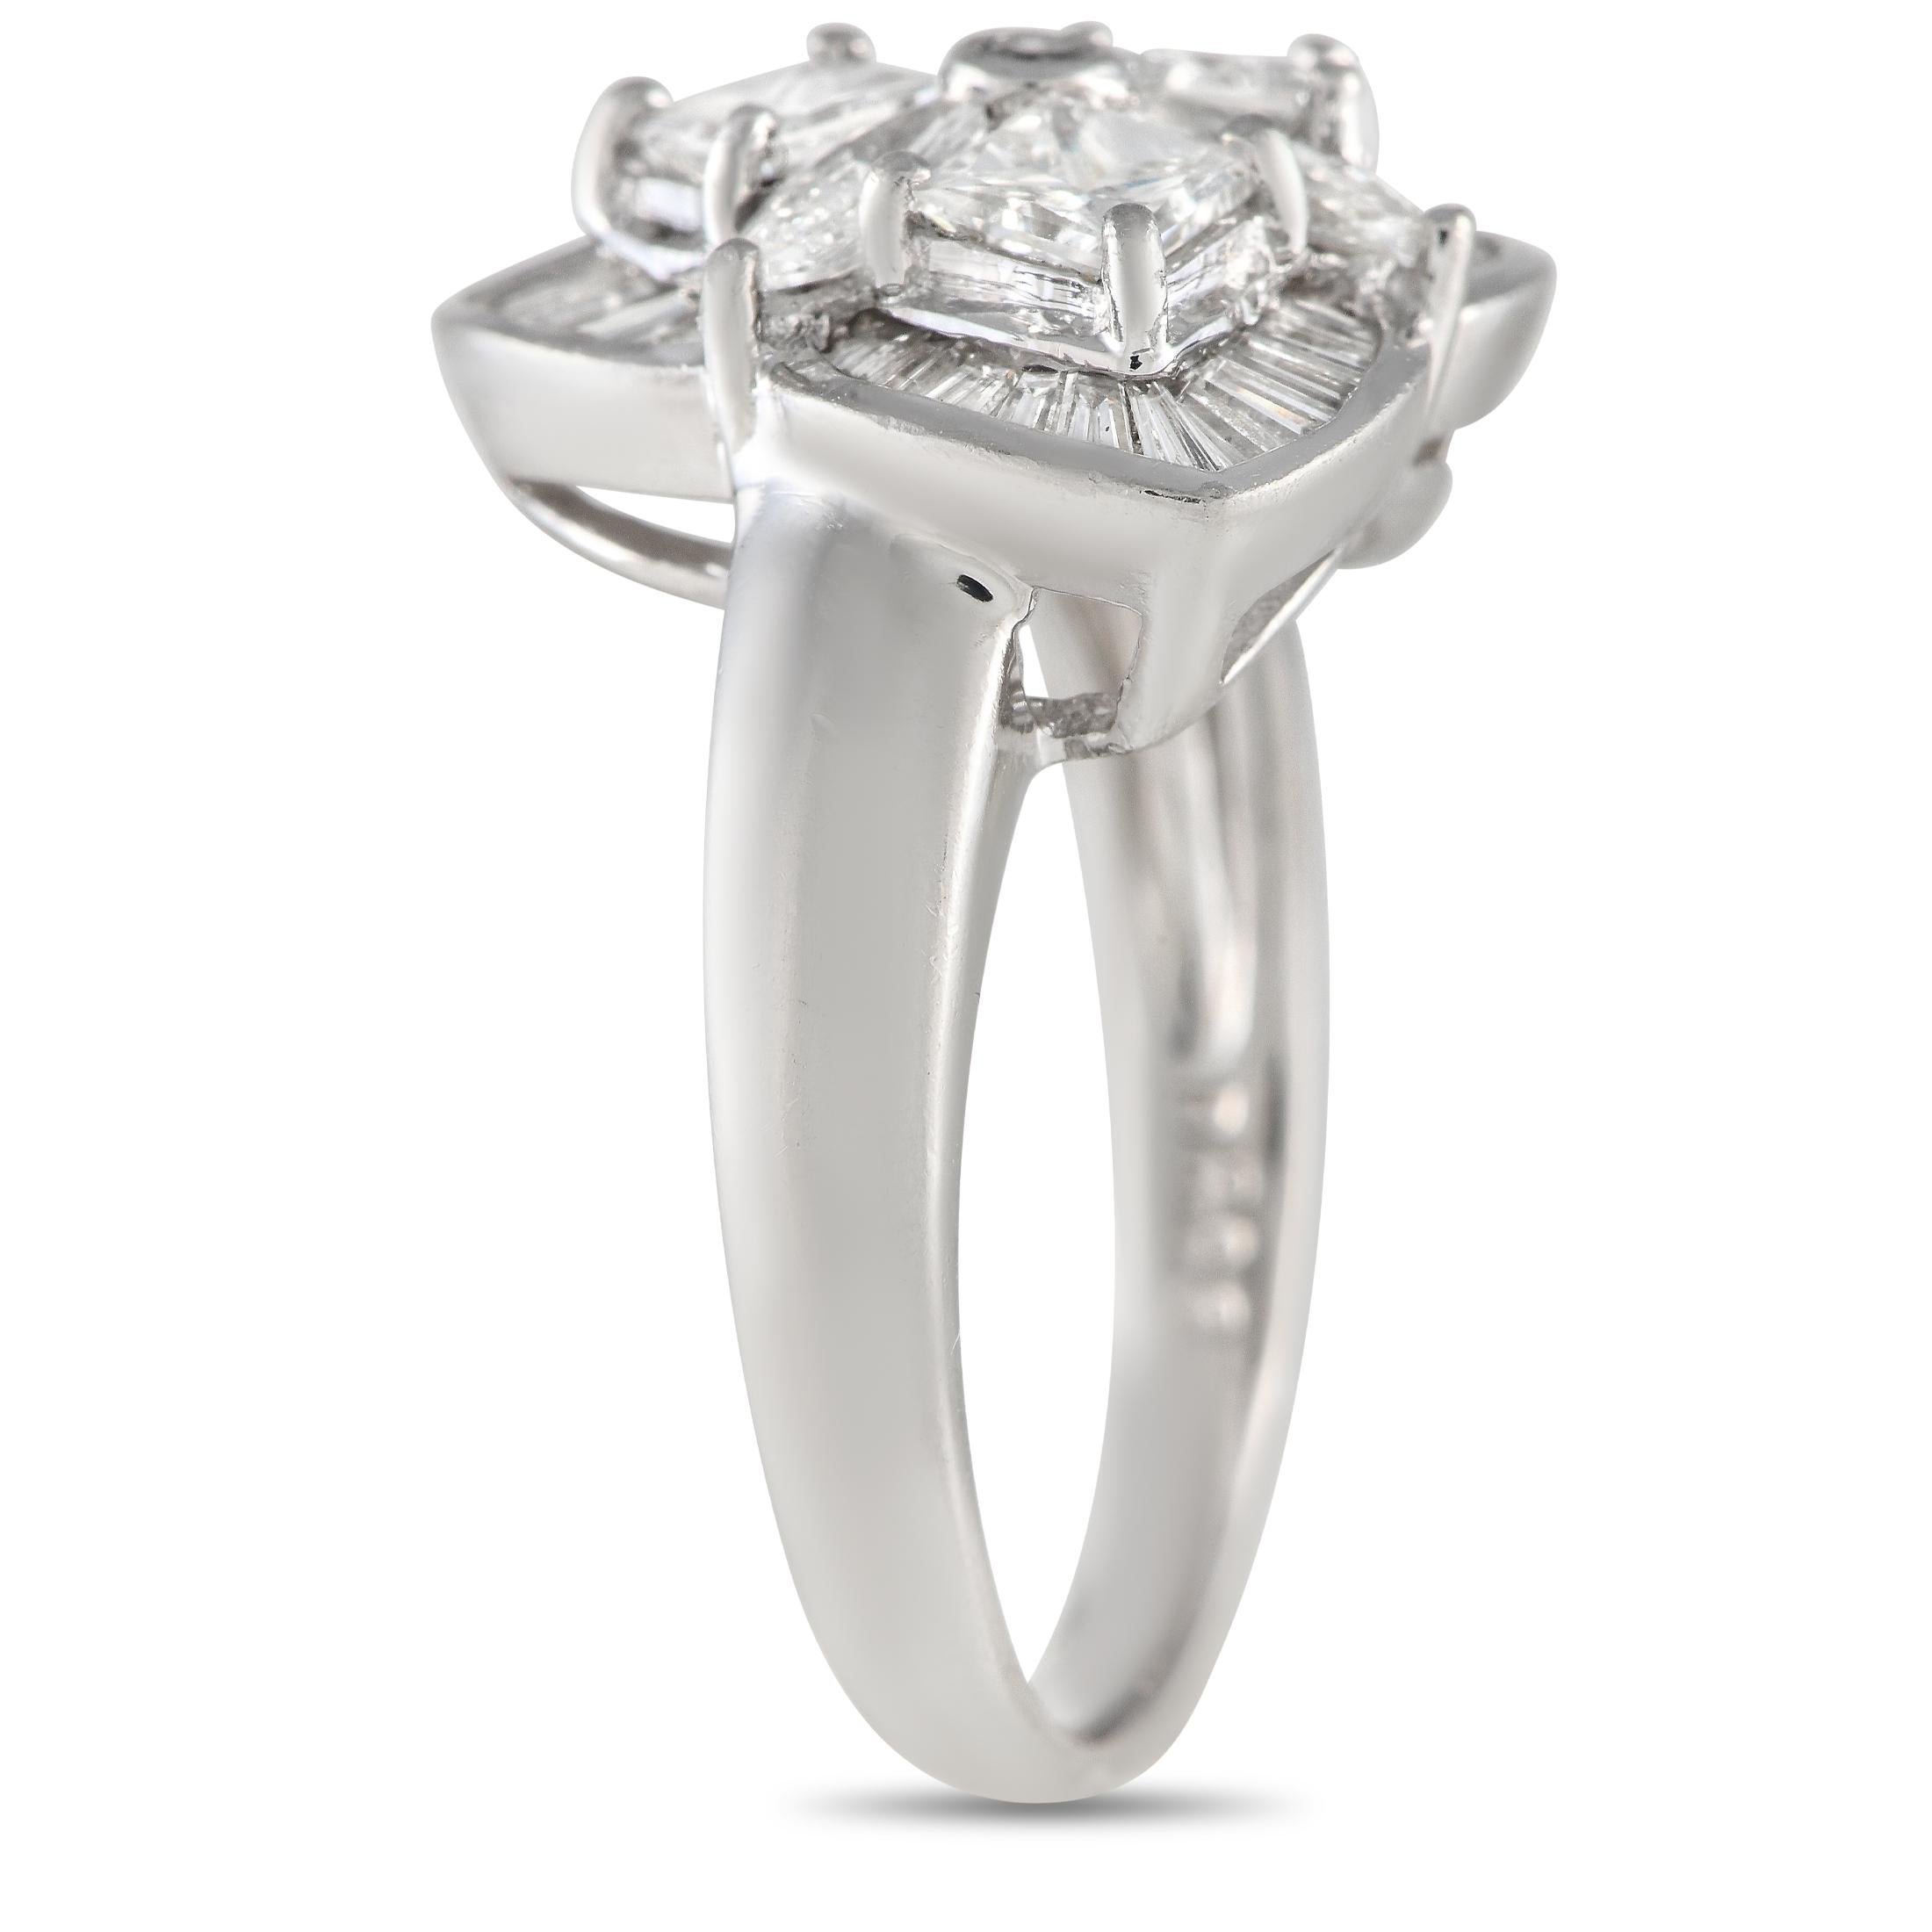 An Art Deco piece showcasing elegance in symmetry and geometry. This platinum ring features a pattern of princess-cut and marquise-cut diamonds framed by three fan-shaped channels filled with tapered baguette-cut diamonds. The ring's top dimensions